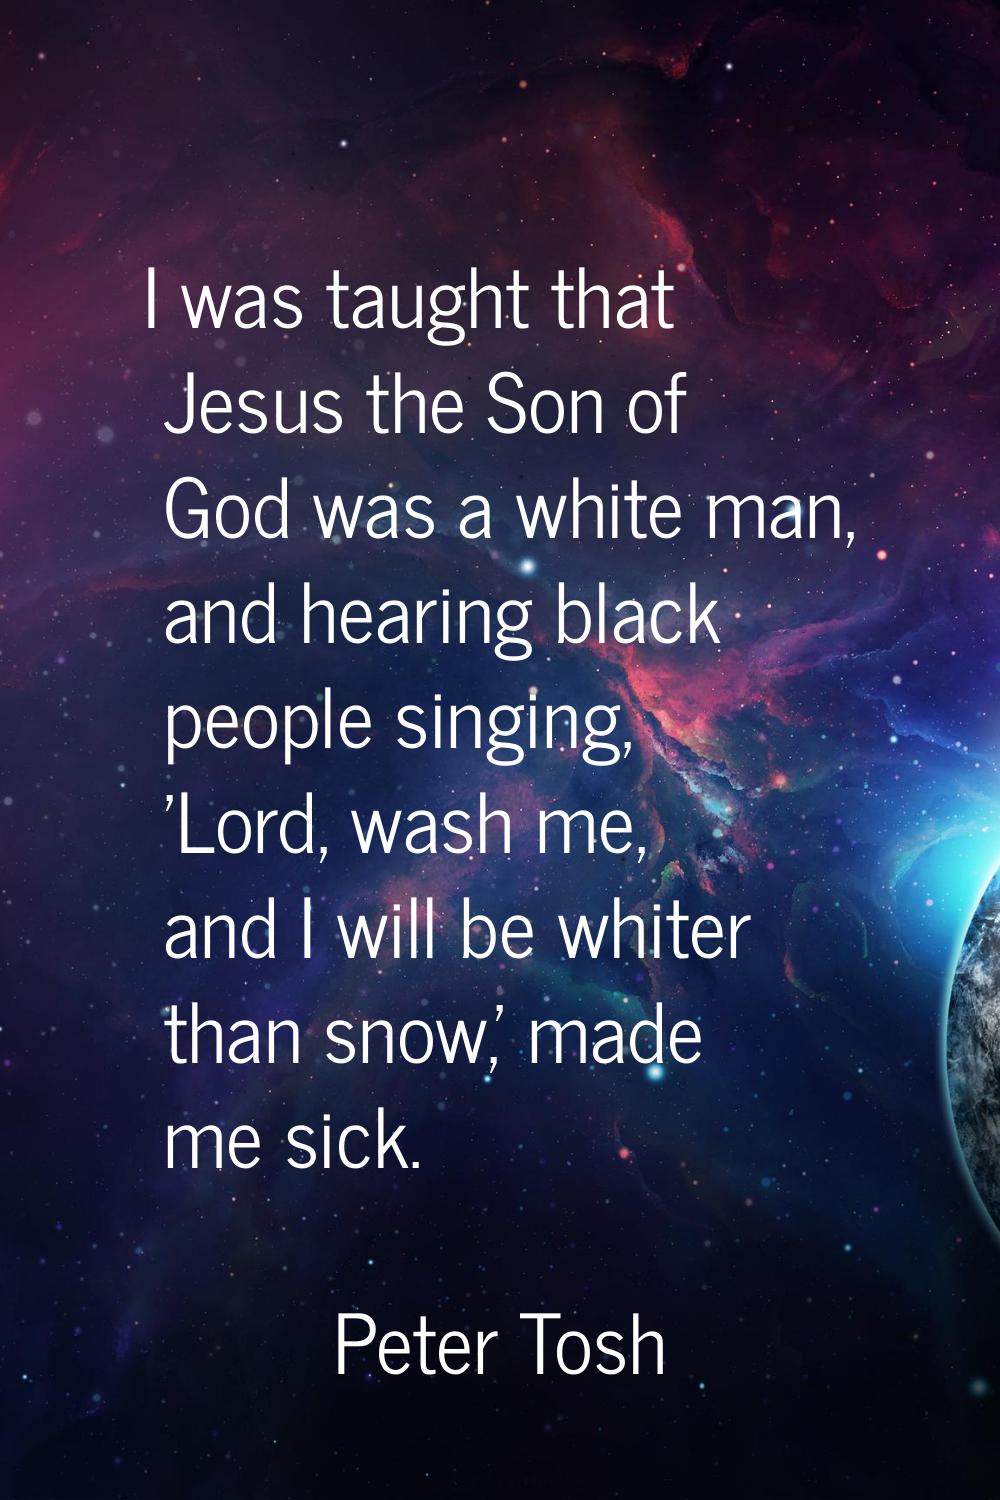 I was taught that Jesus the Son of God was a white man, and hearing black people singing, 'Lord, wa